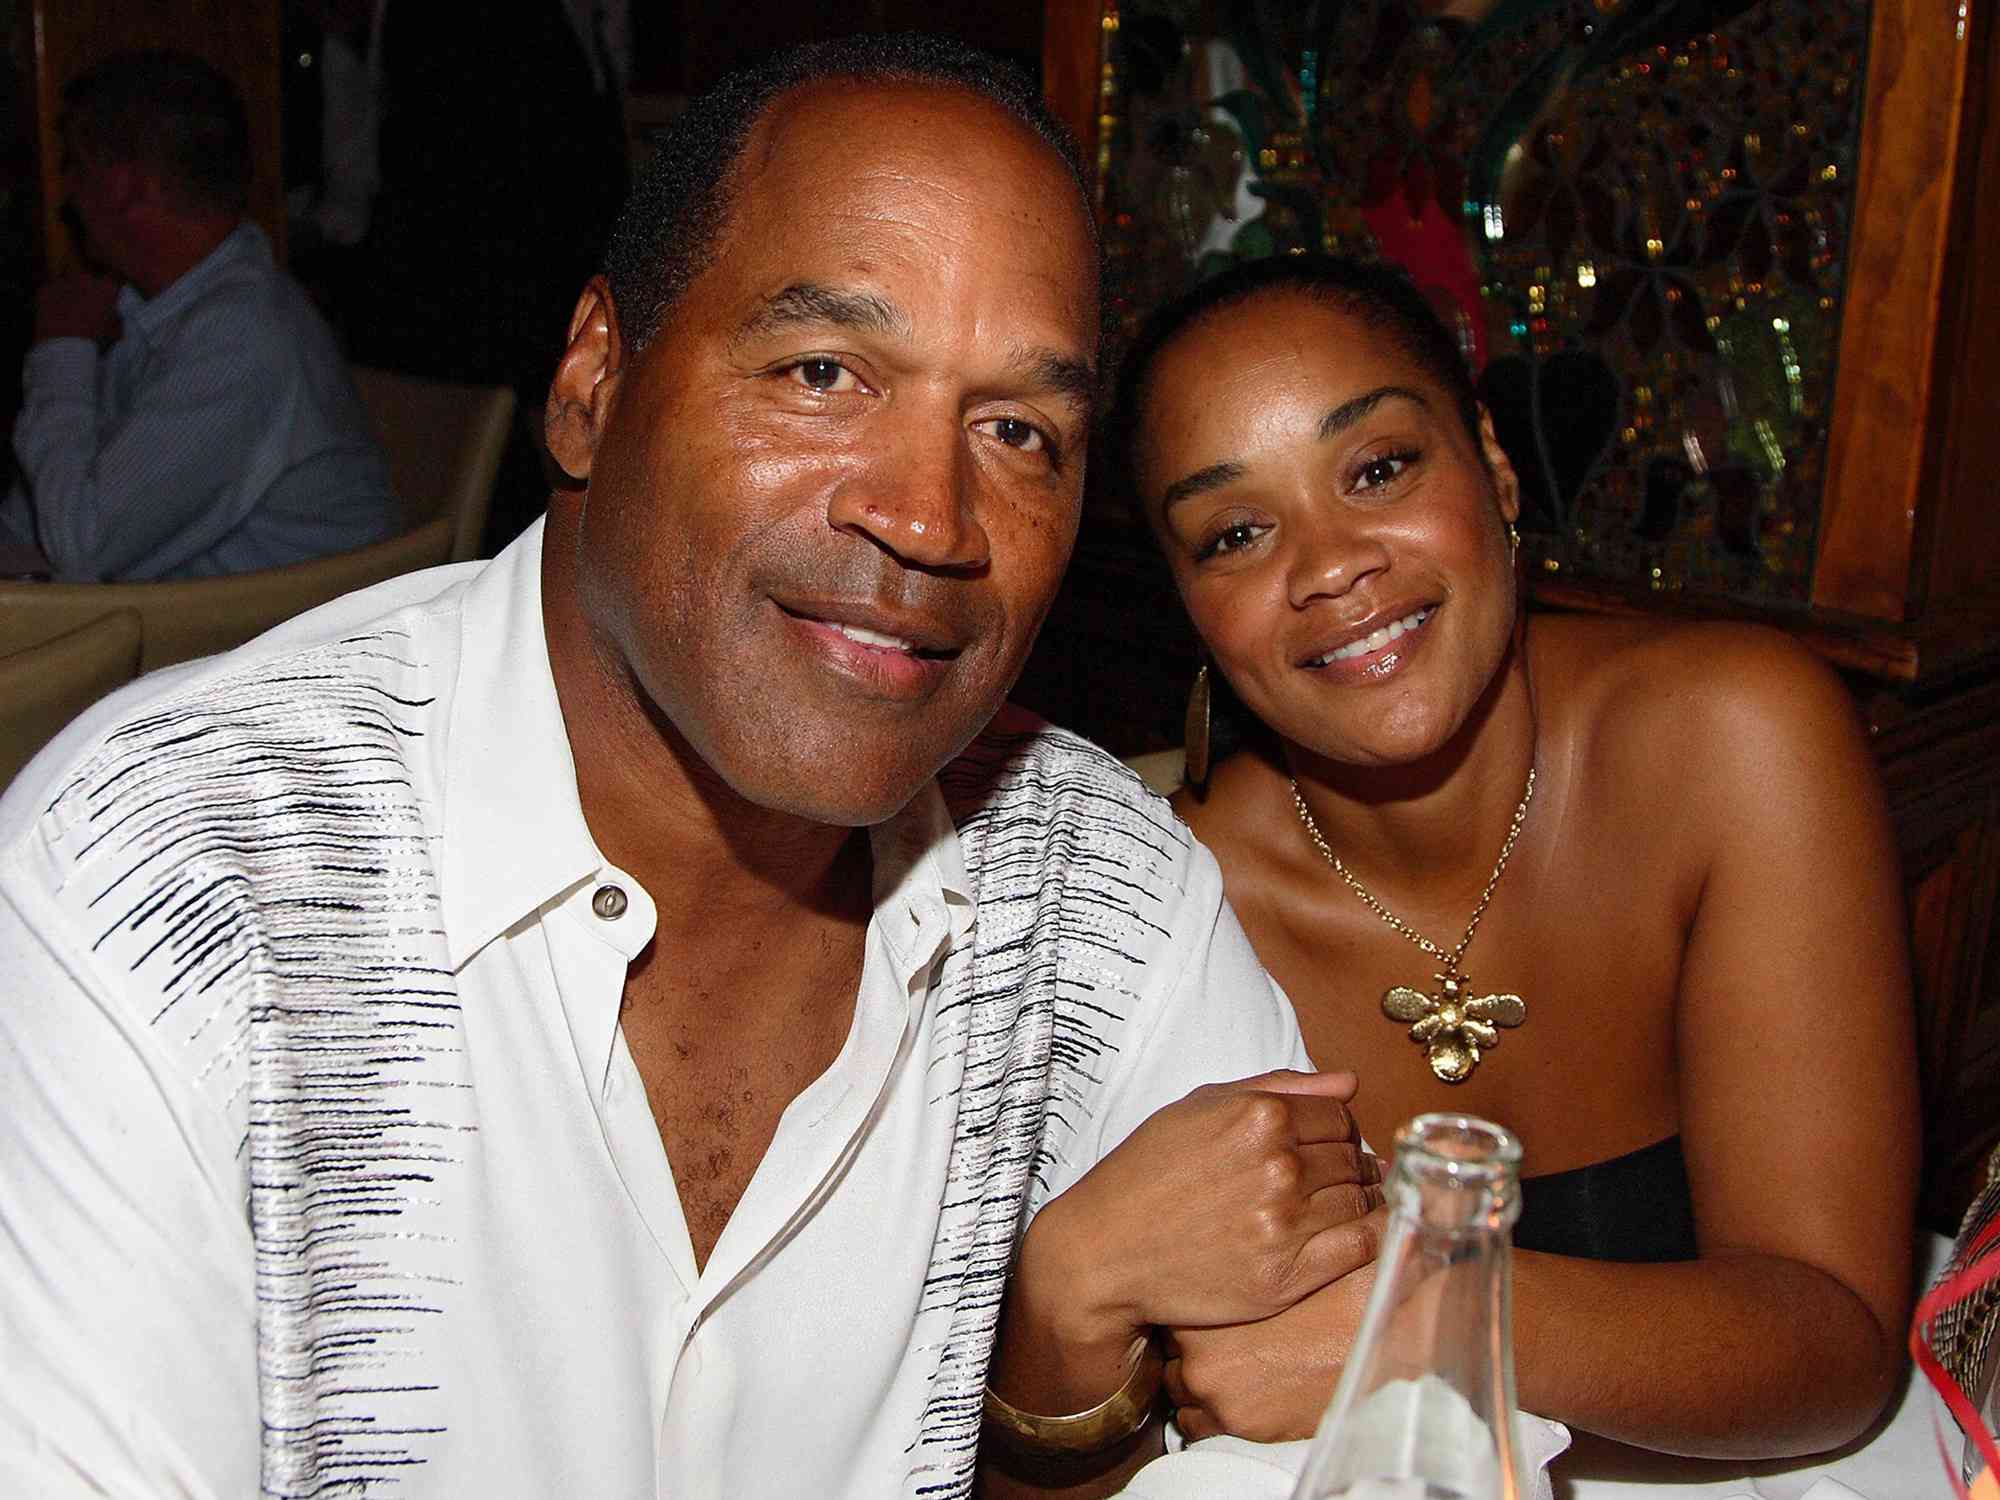  O.J. Simpson and daughter Arnelle Simpson at the Forge restaurant during DJ Irie's birthday celebration on June 20, 2007 in Miami Beach, Florida.